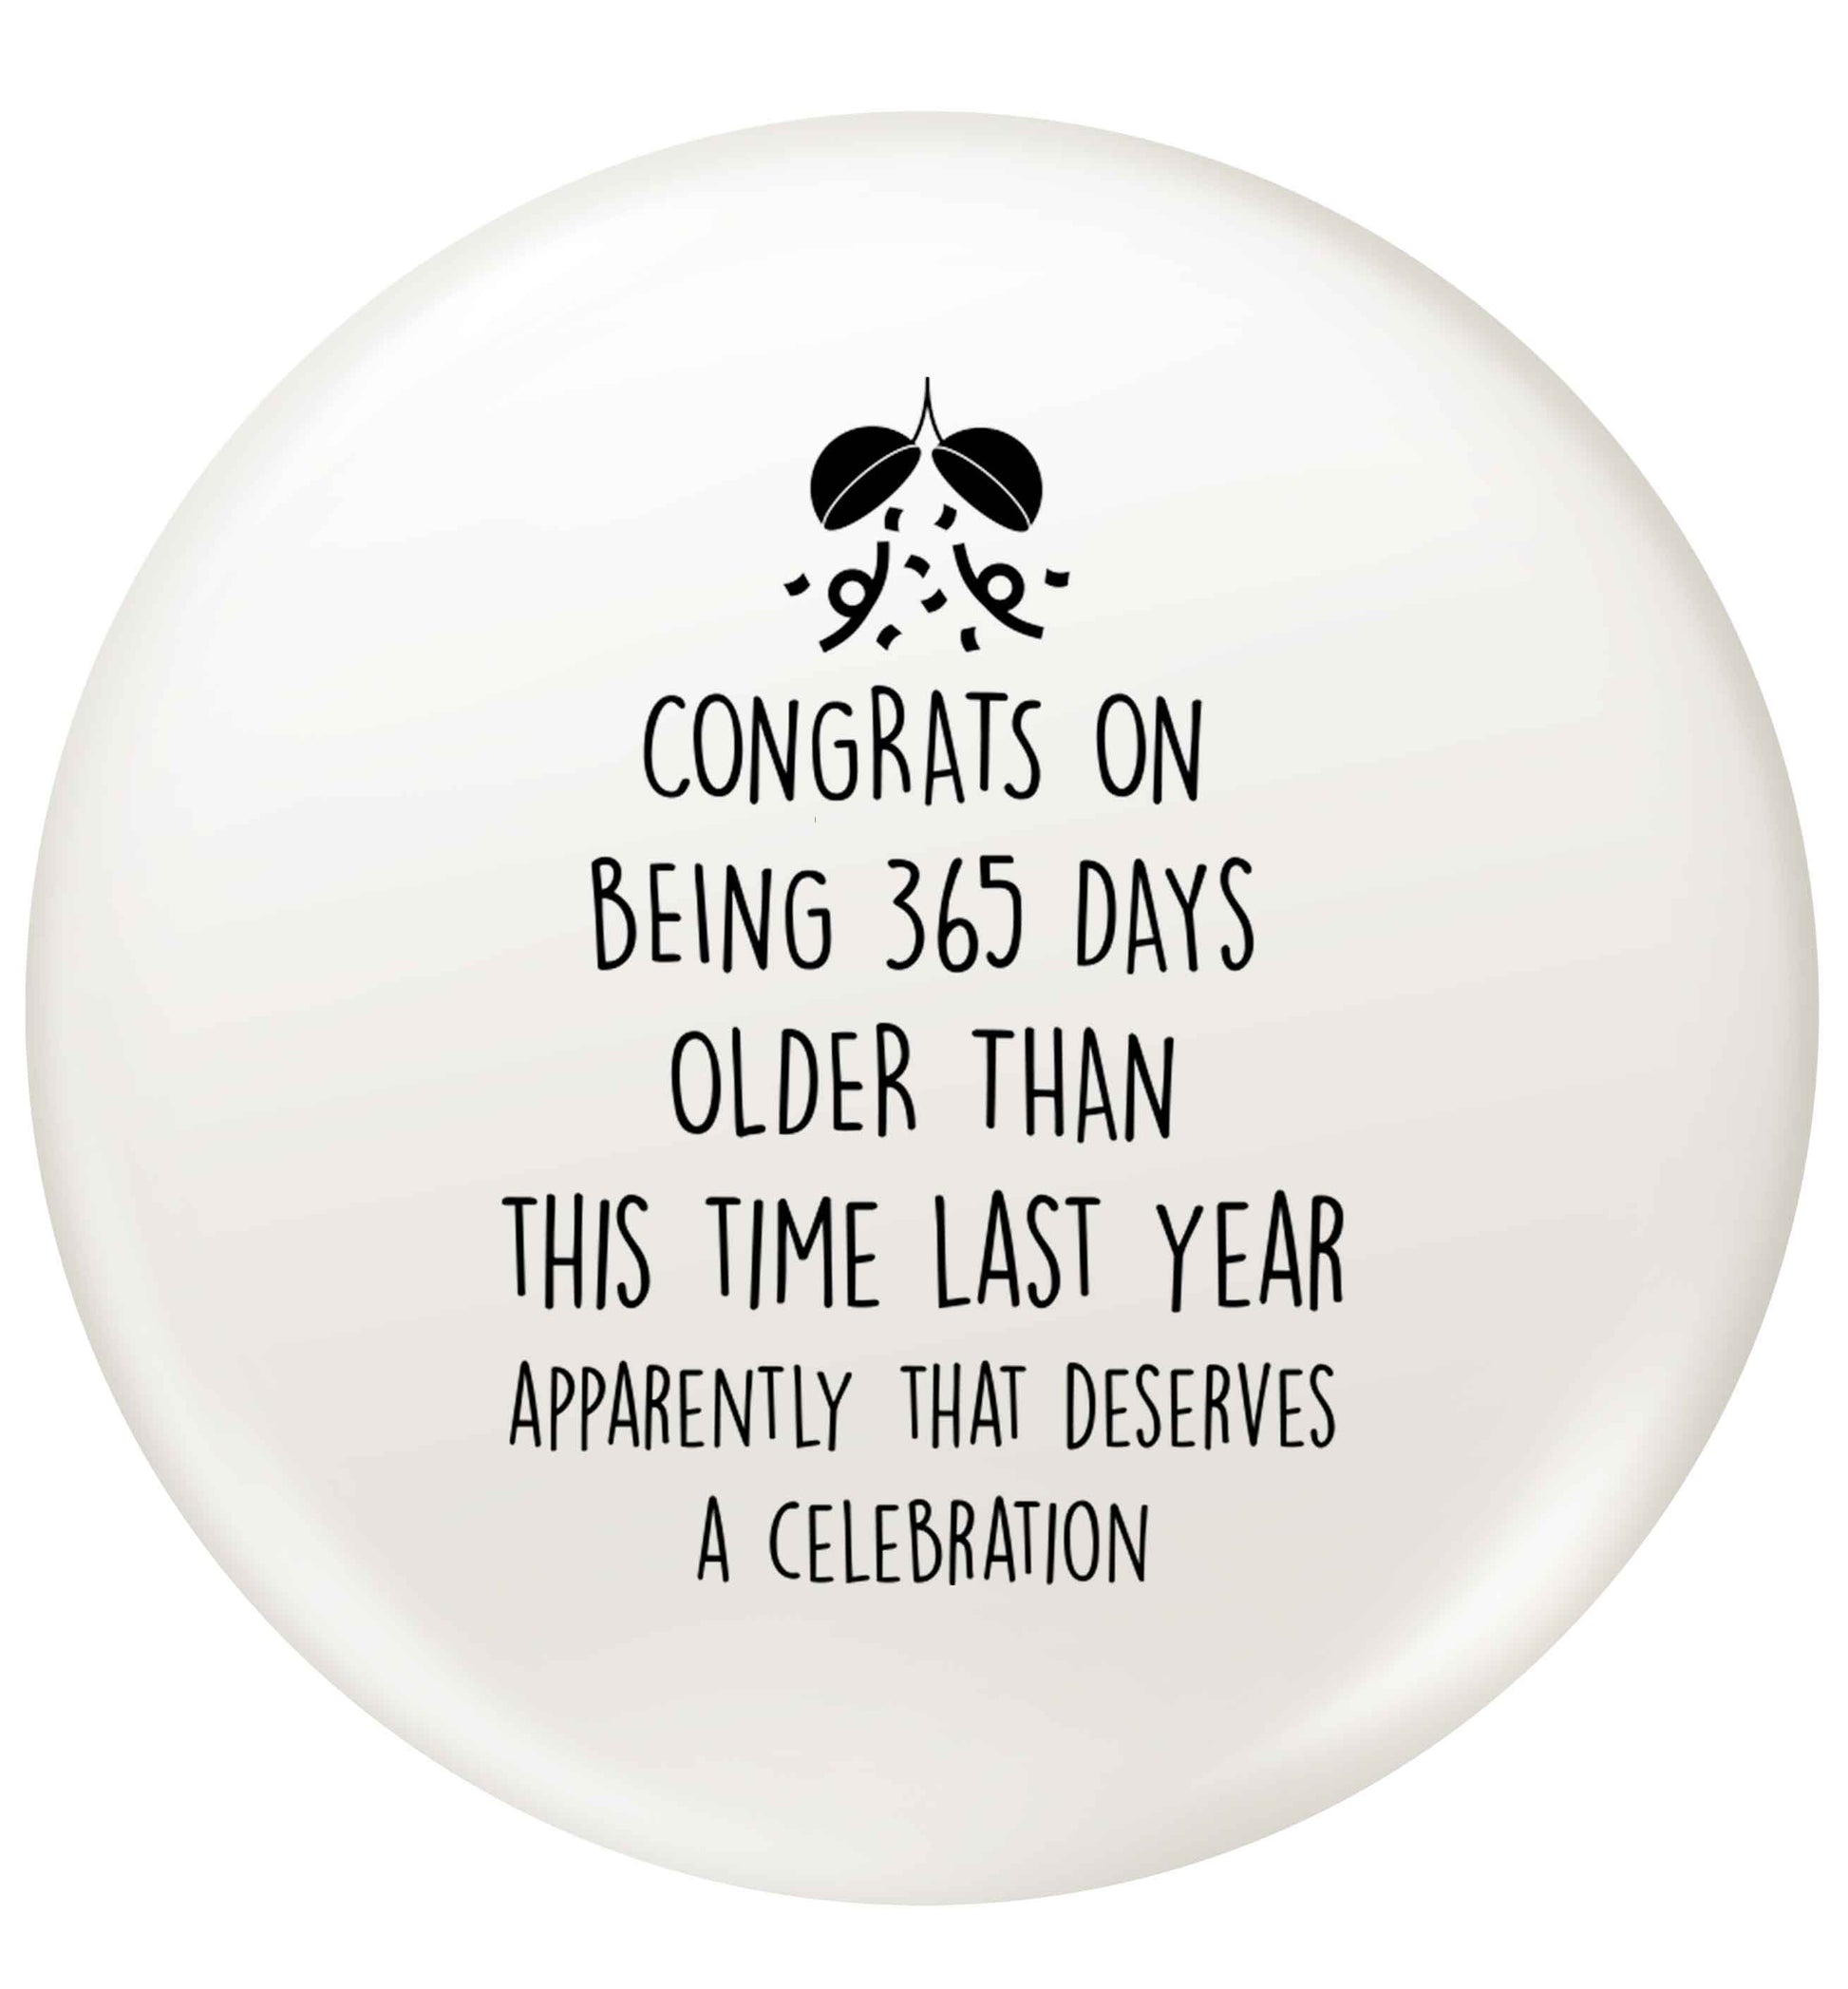 Congrats on being 365 days older than you were this time last year apparently that deserves a celebration small 25mm Pin badge